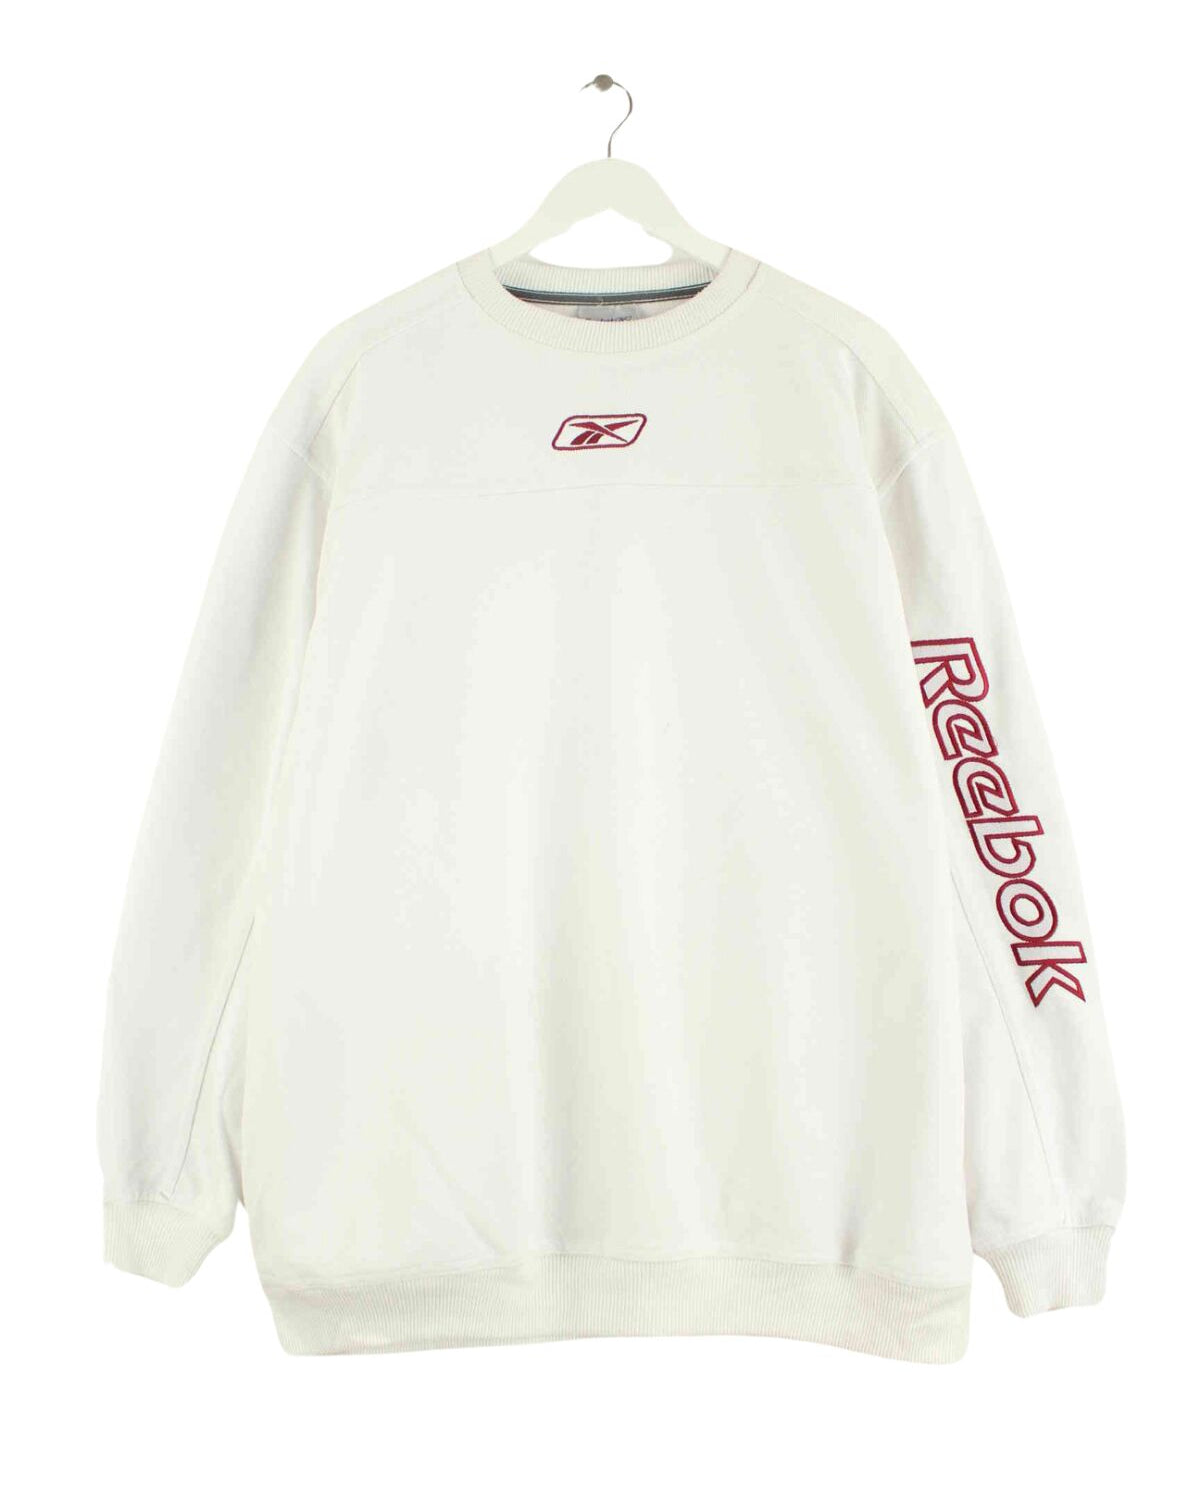 Reebok 00s Big Spellout Embroidered Sweater Weiß XL (front image)